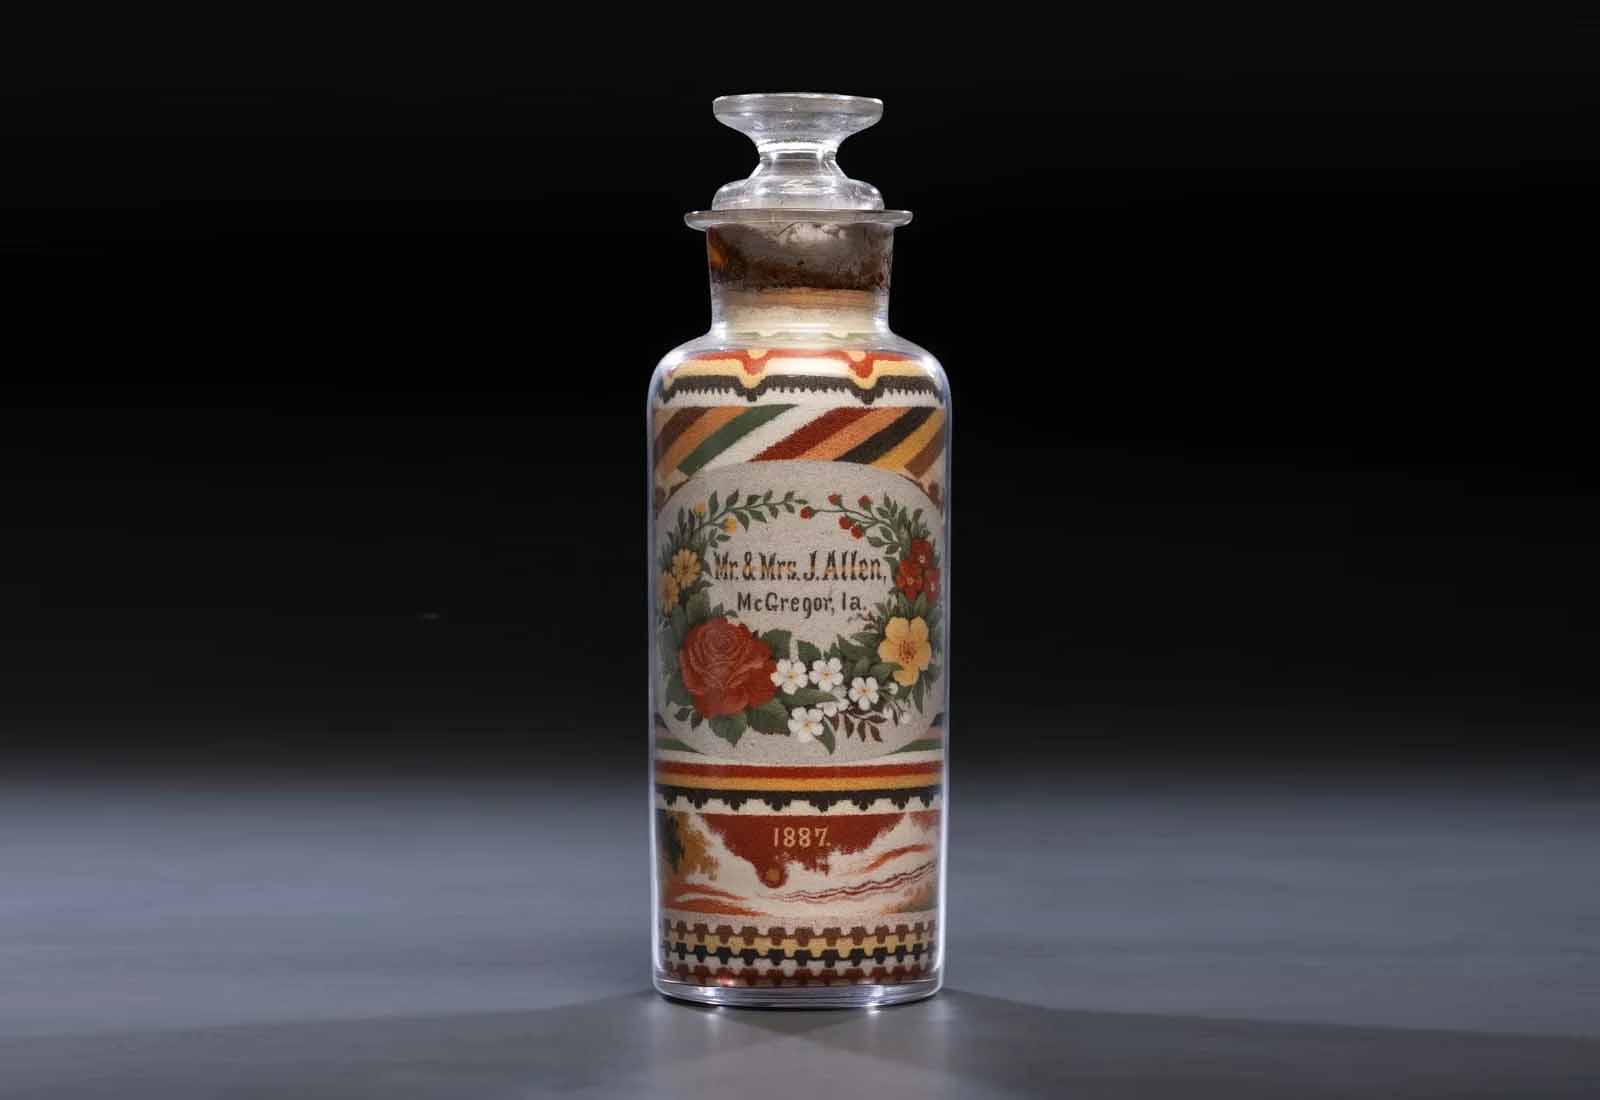 1887 Andrew Clemens sand bottle first among offerings at Hindman&#8217;s Oct. 4 auction